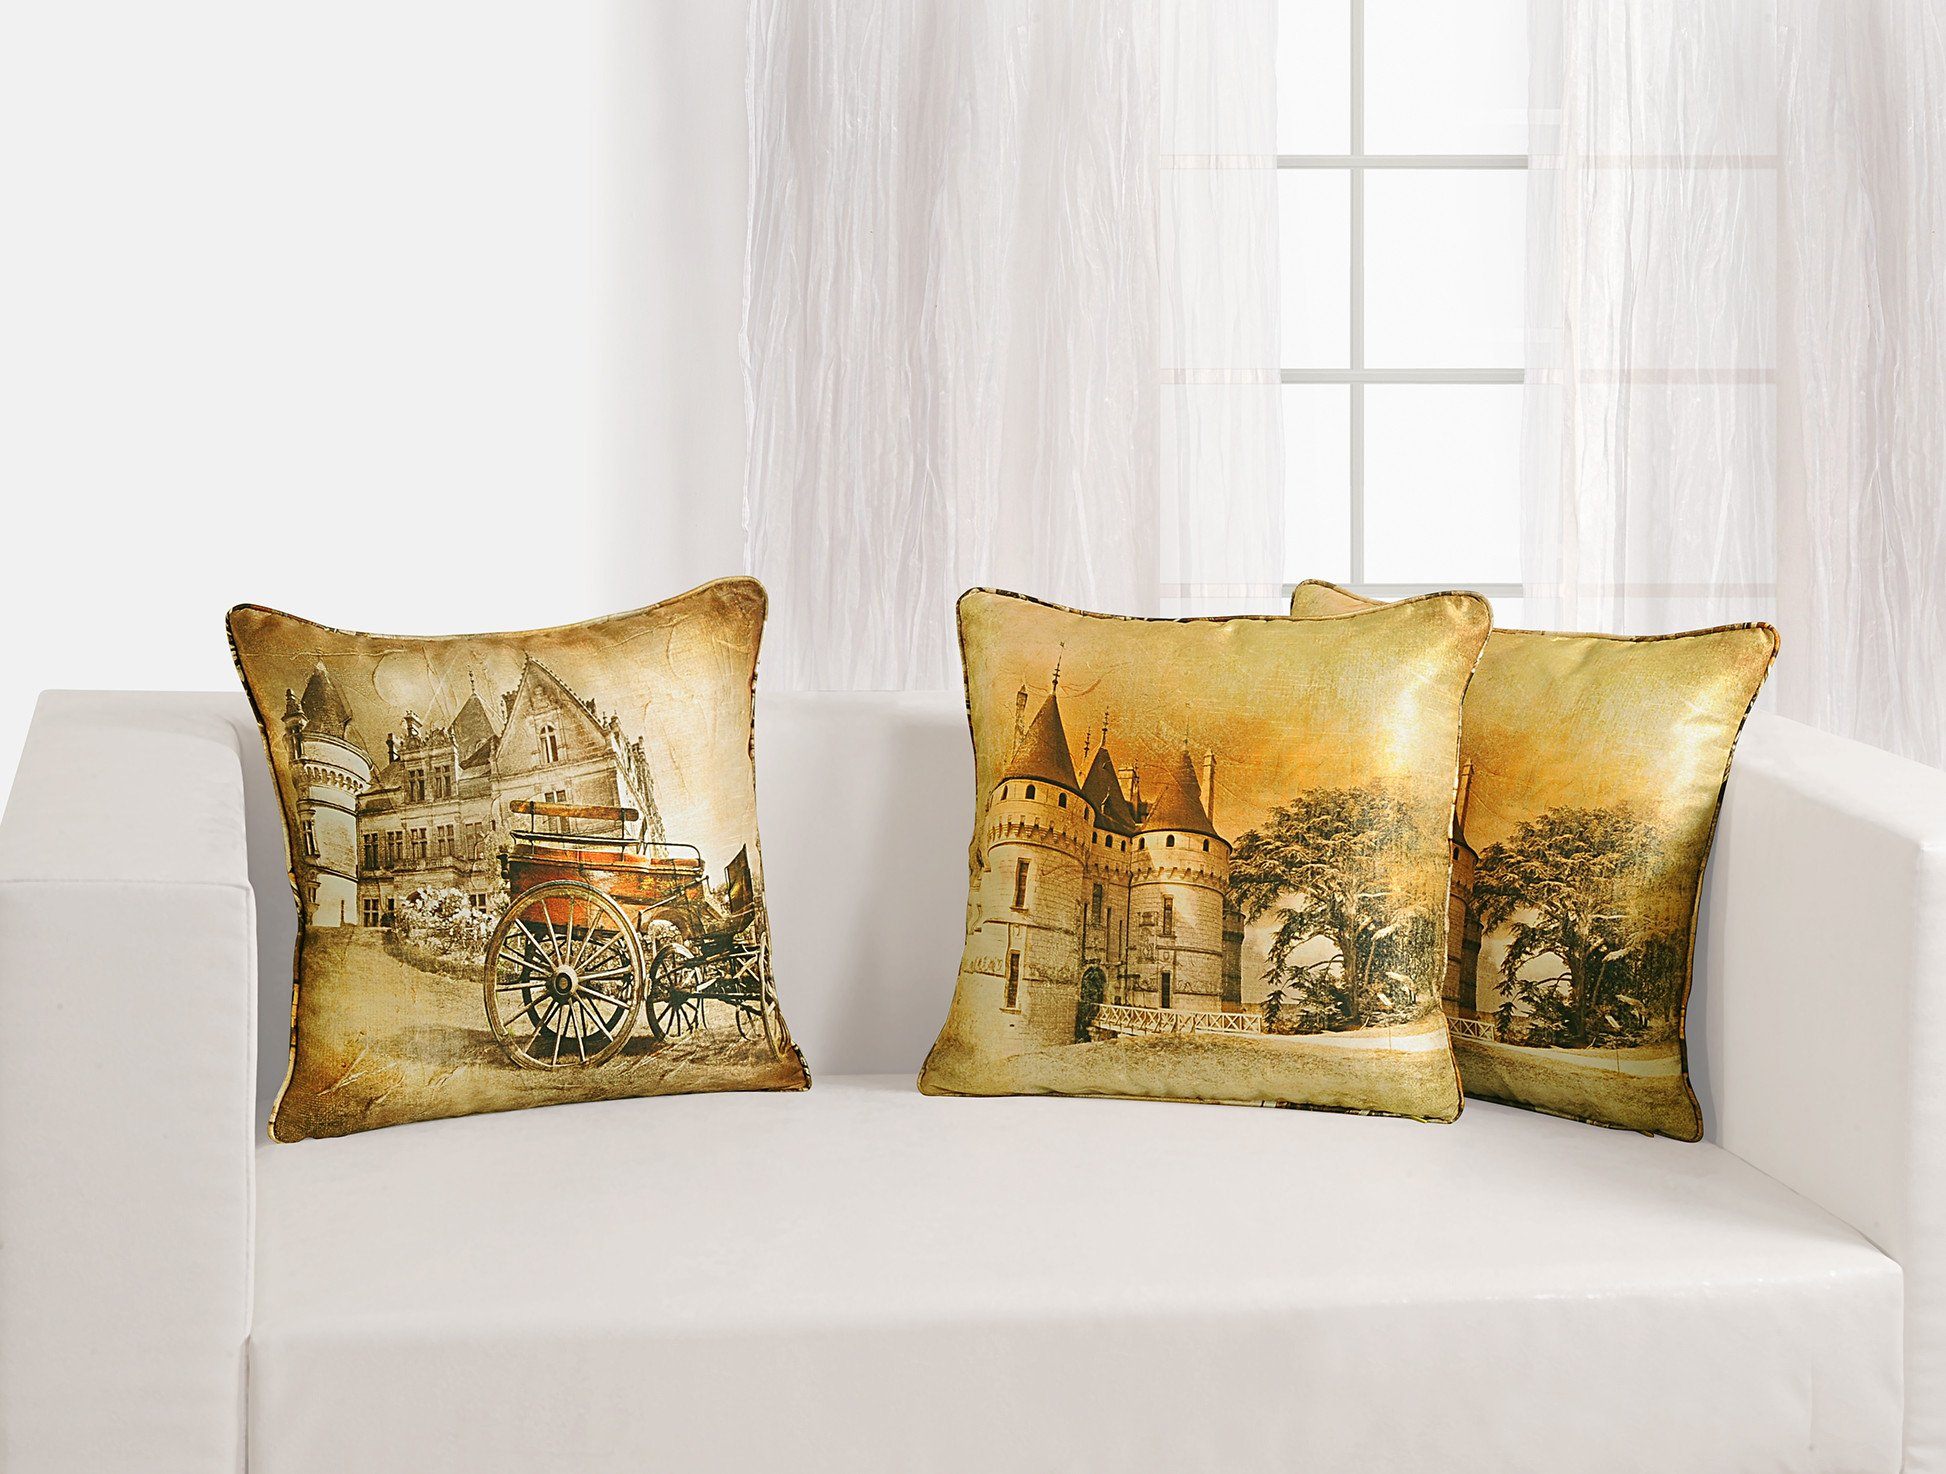 CASTLE CUSHION COVER - Flickdeal.co.nz